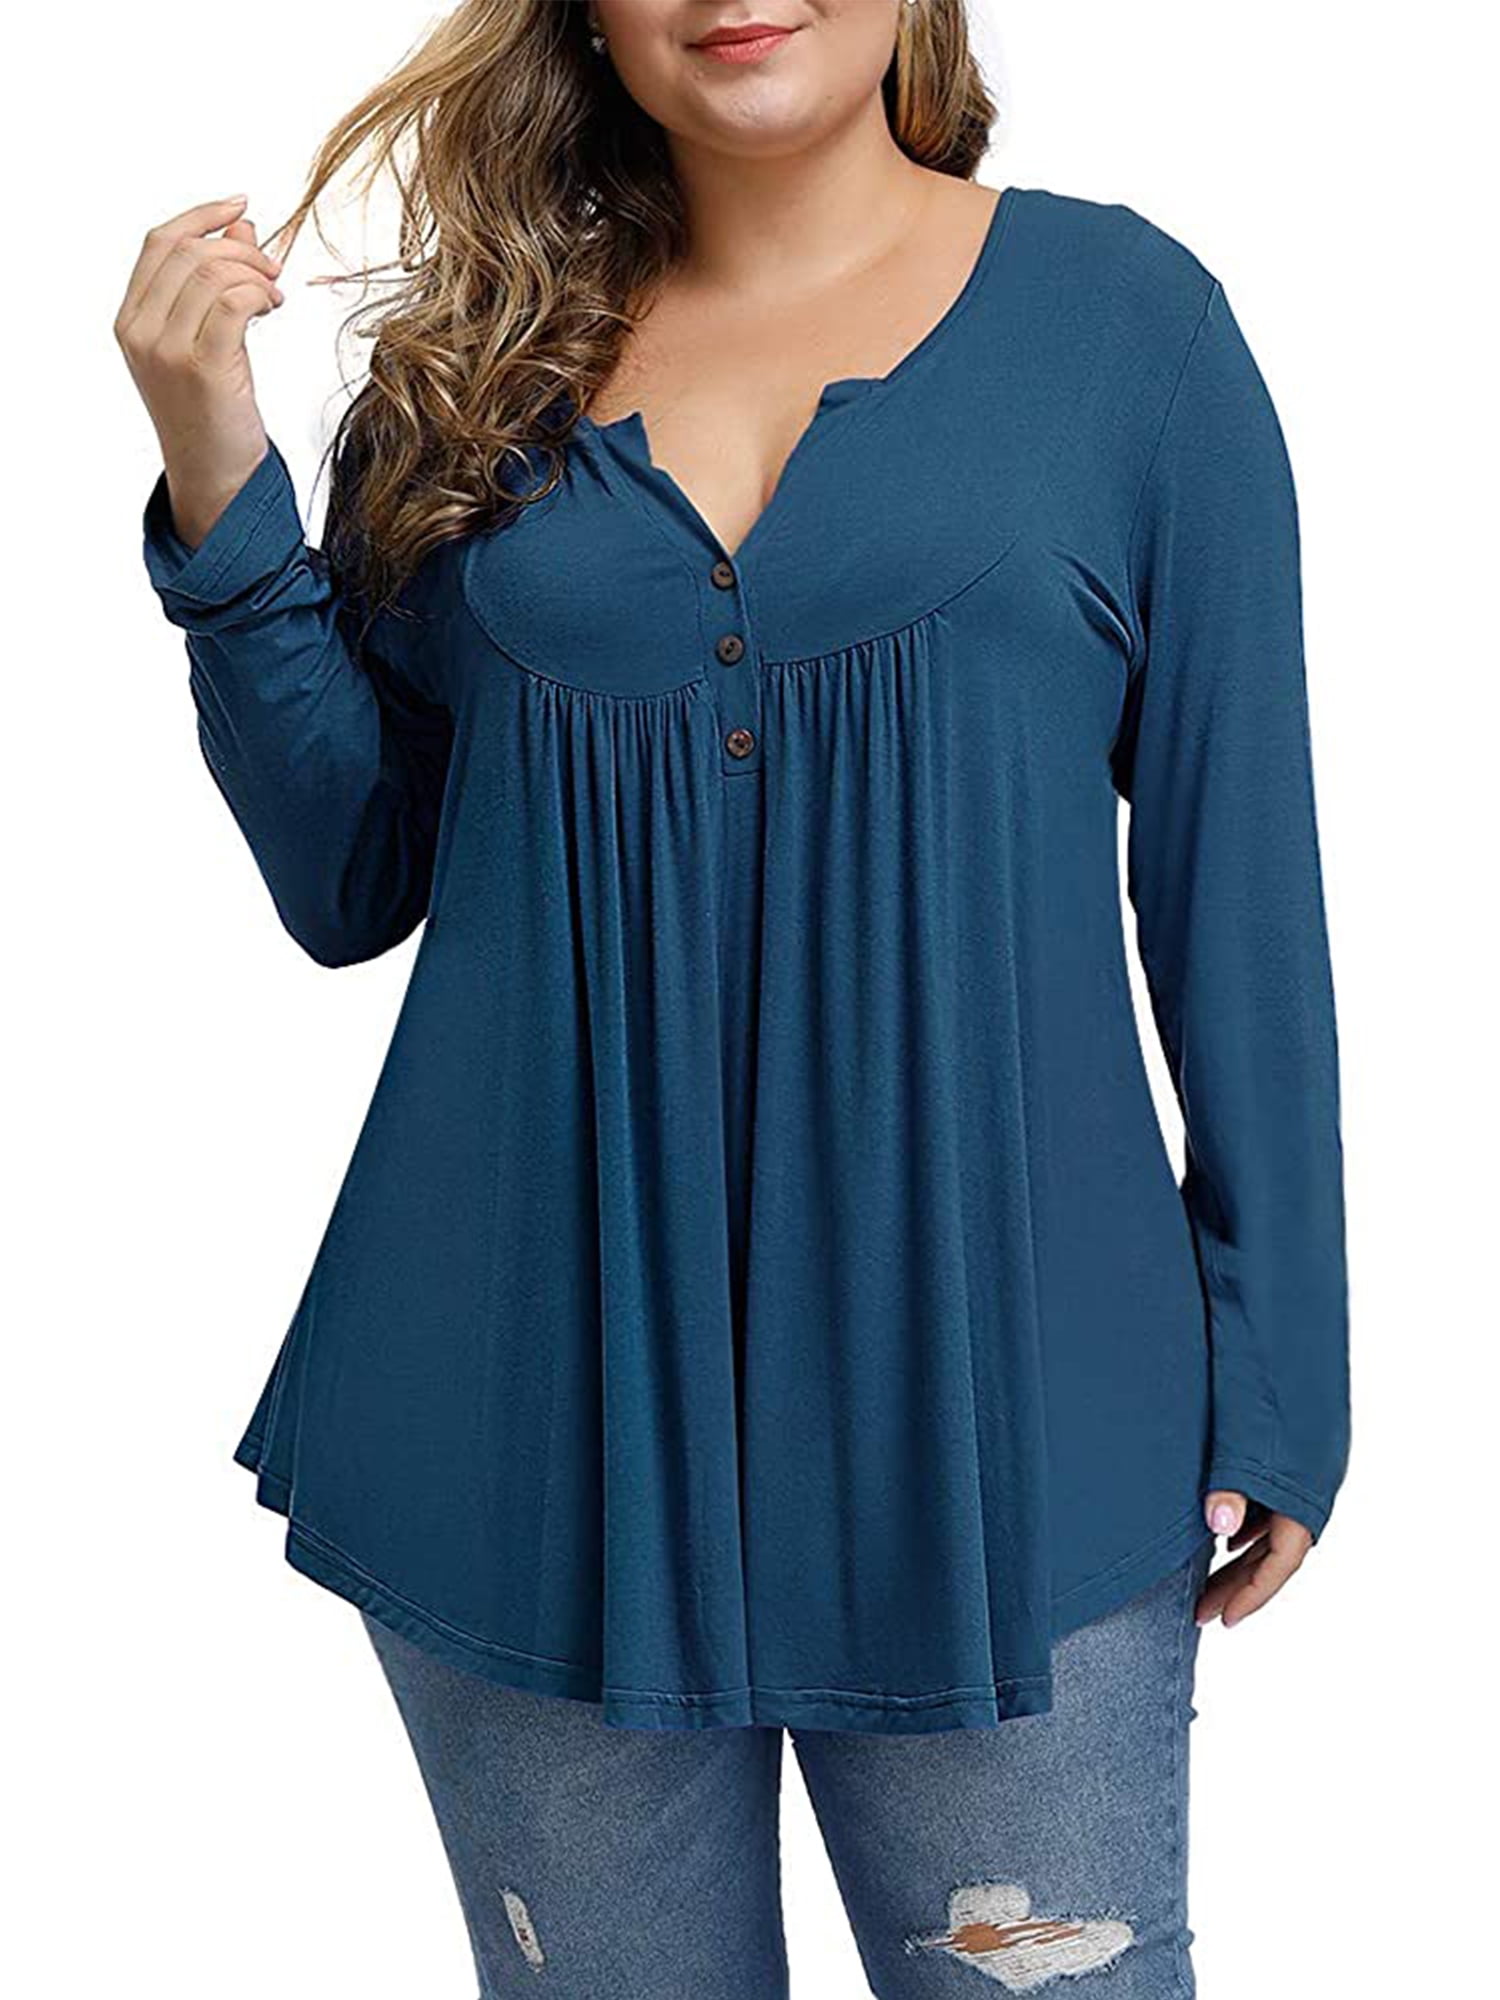 VISLILY Womens Plus-Size Tops Long Sleeve Tee Shirts Pleated Button Up Tunics 